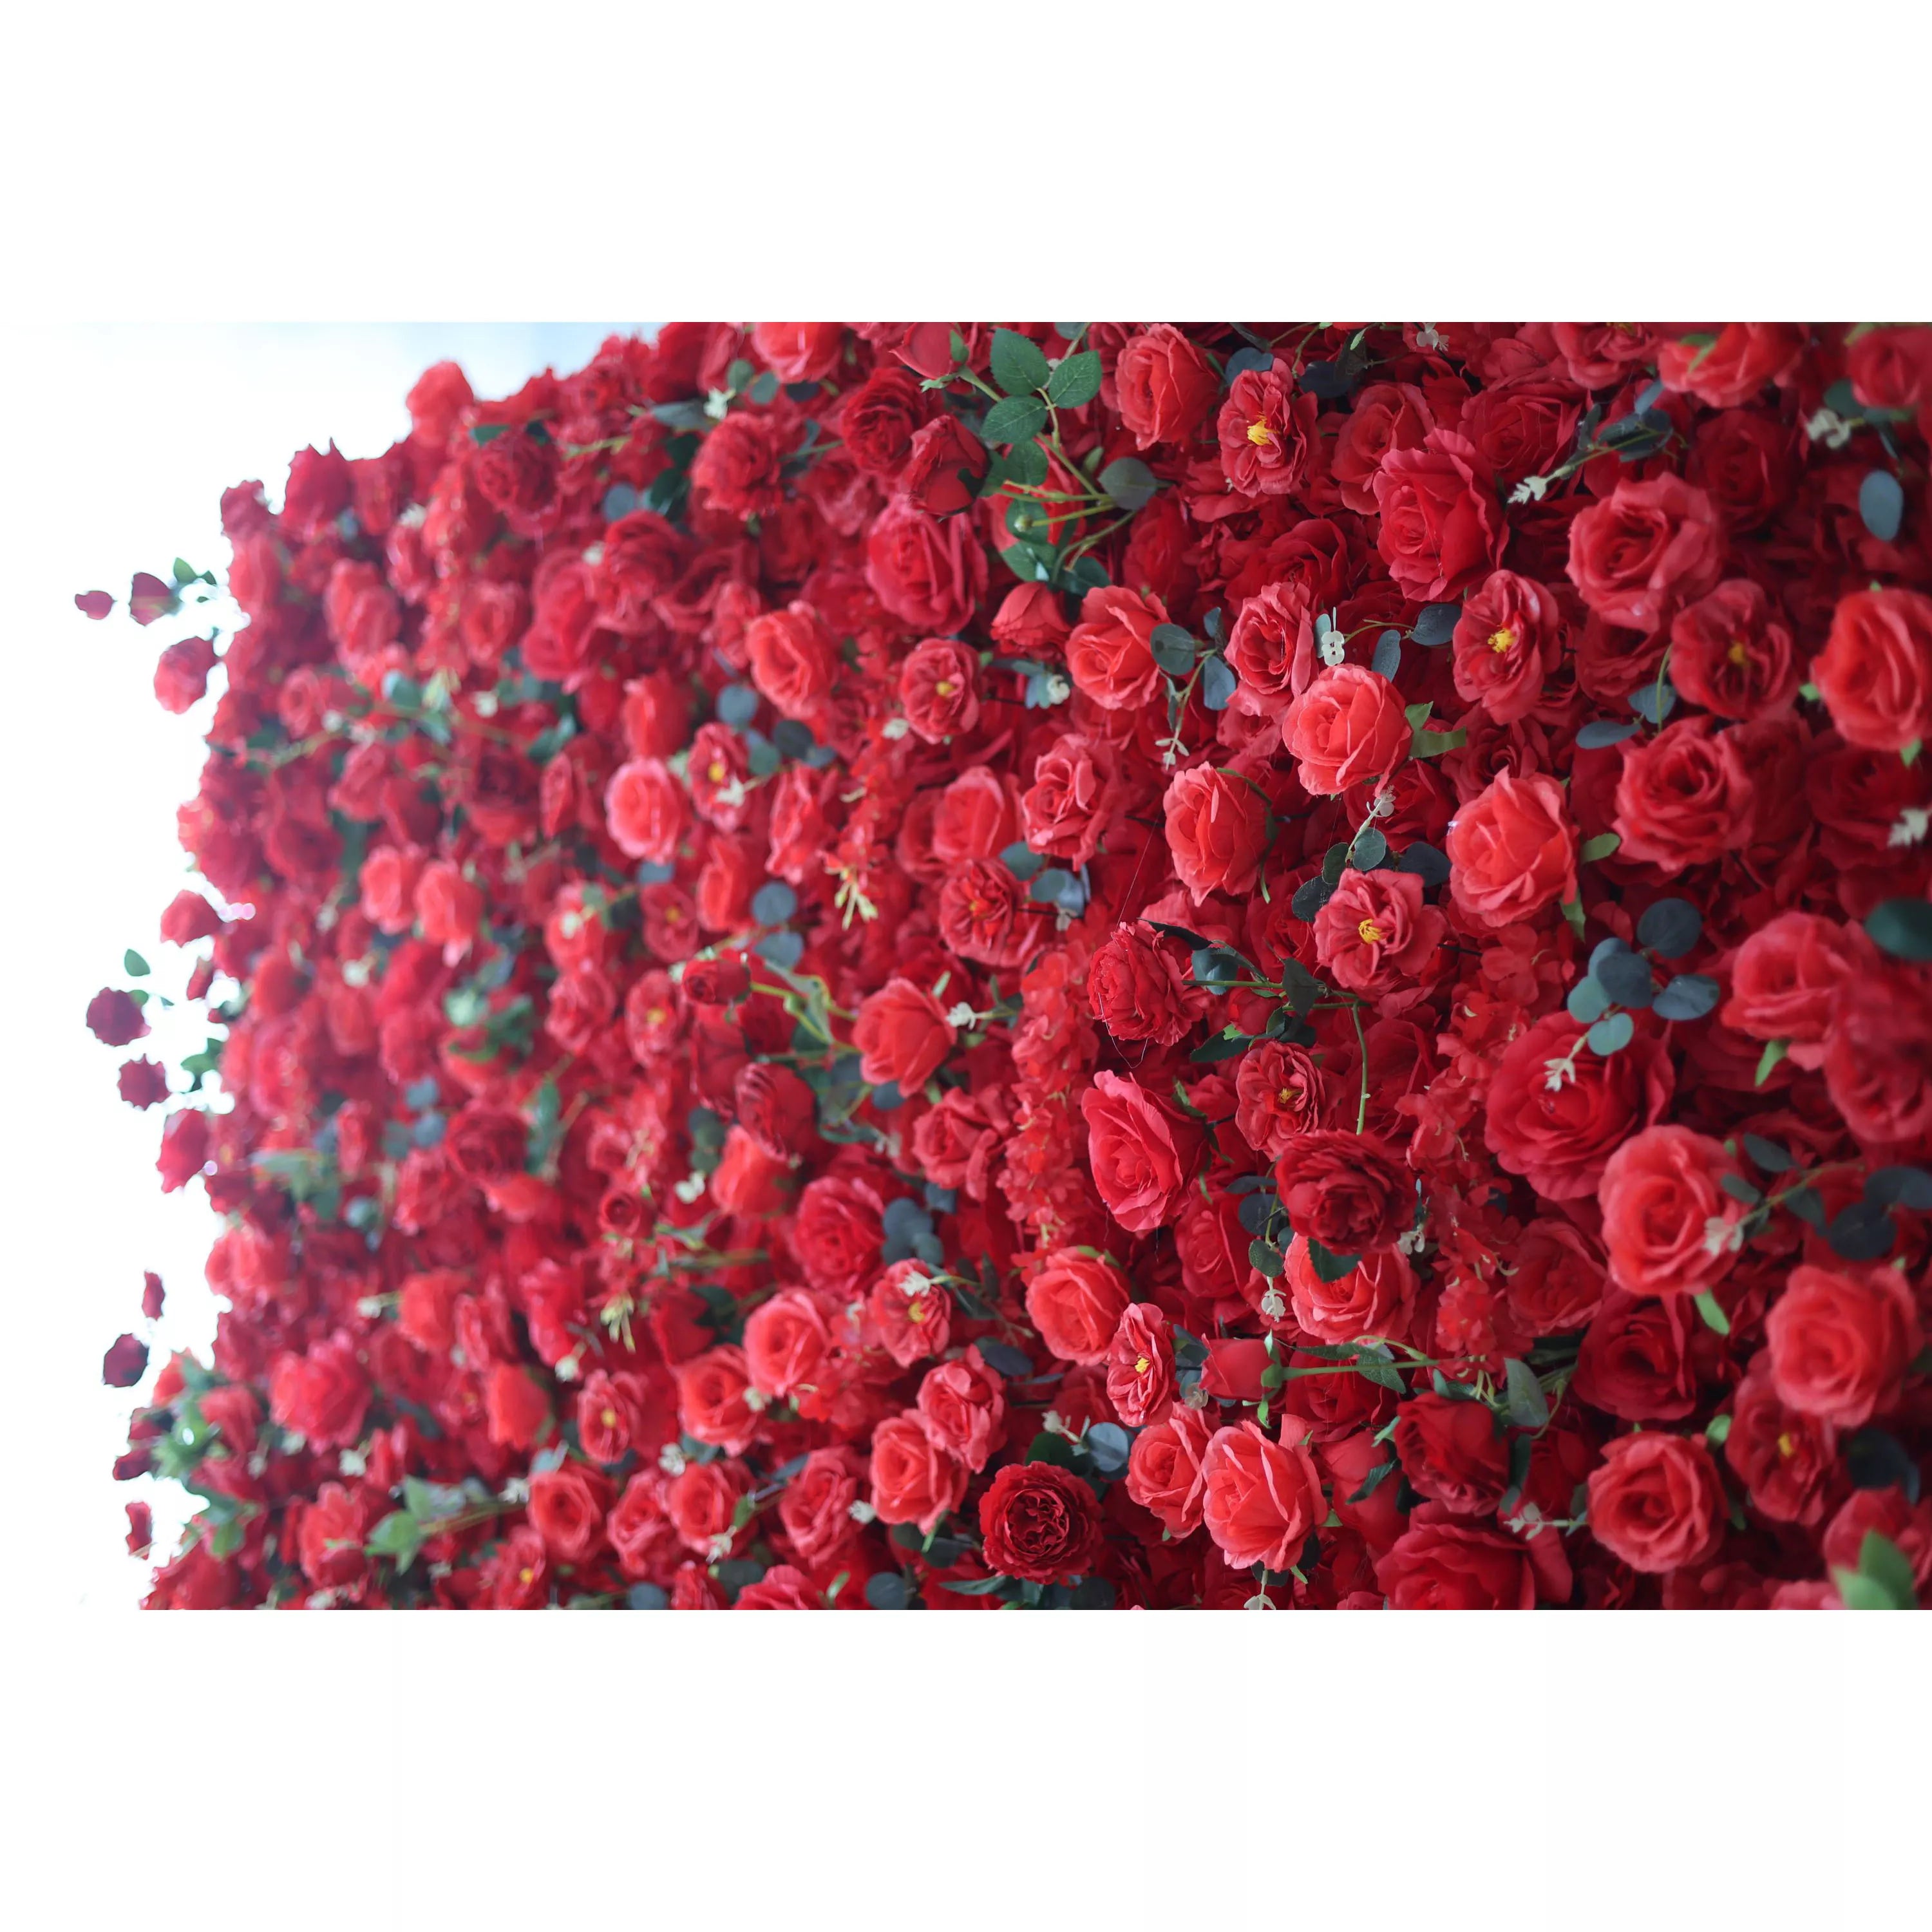 ValarFlowers Artificial Floral Wall Backdrop: The Red Rose Rapture - Passion Personified-VF-279